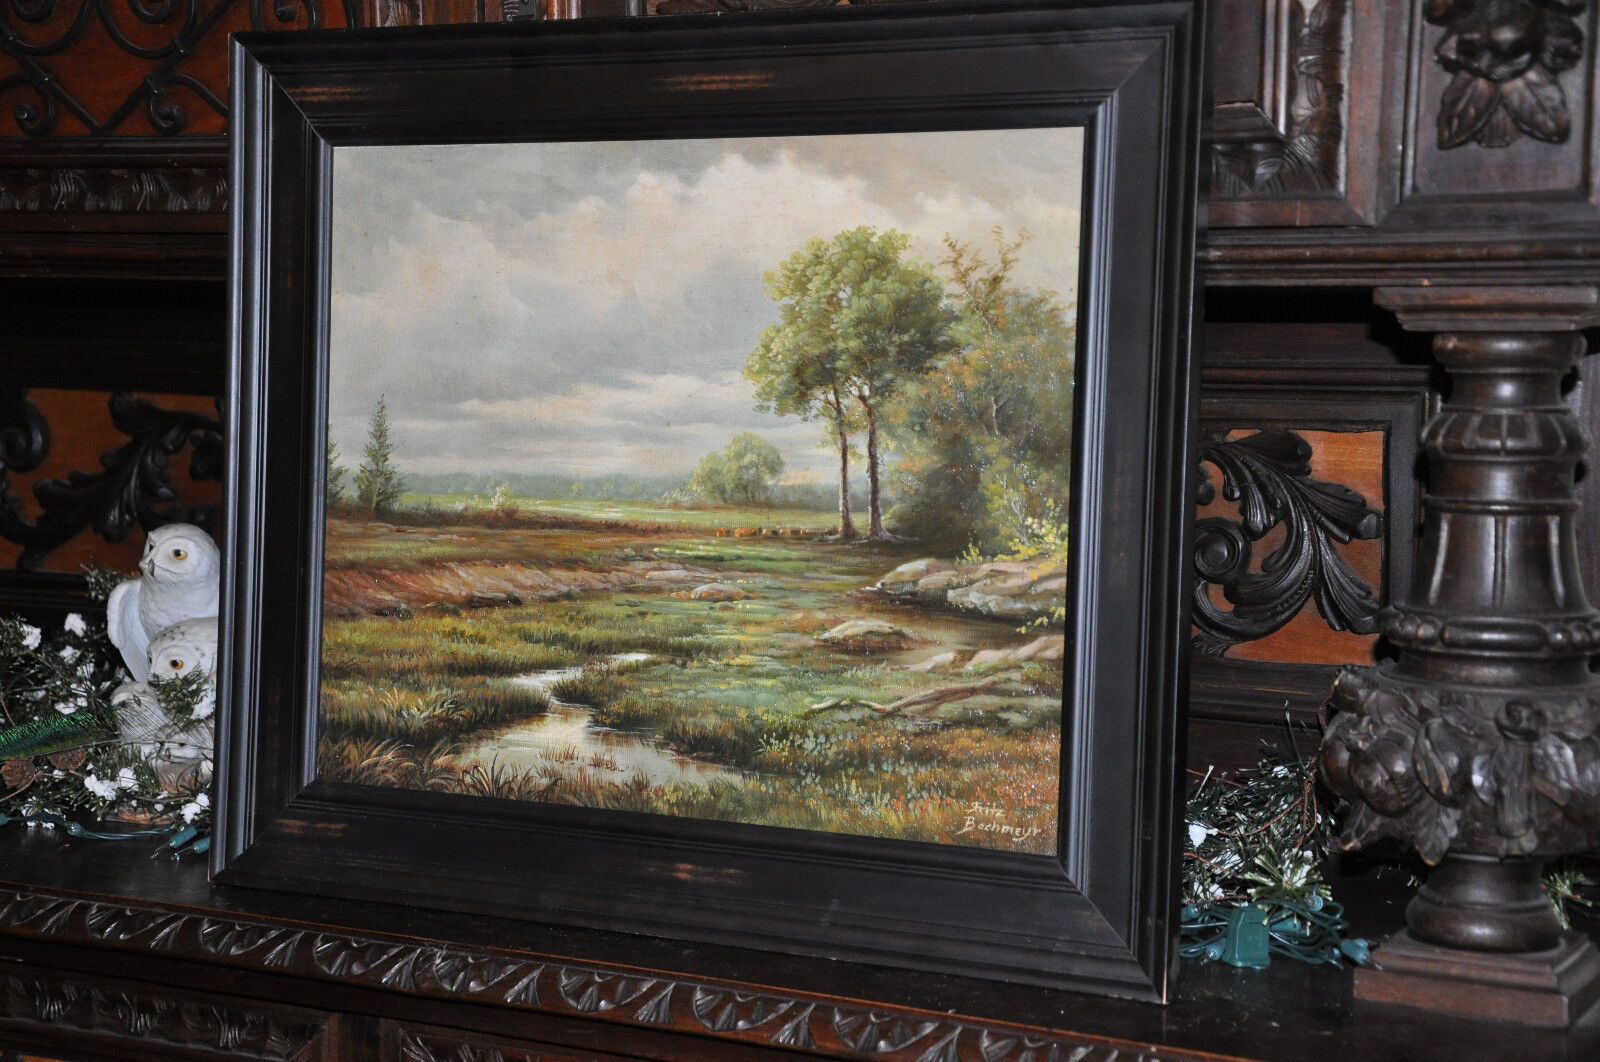 spectacular Vintage Landscape painting well known artist